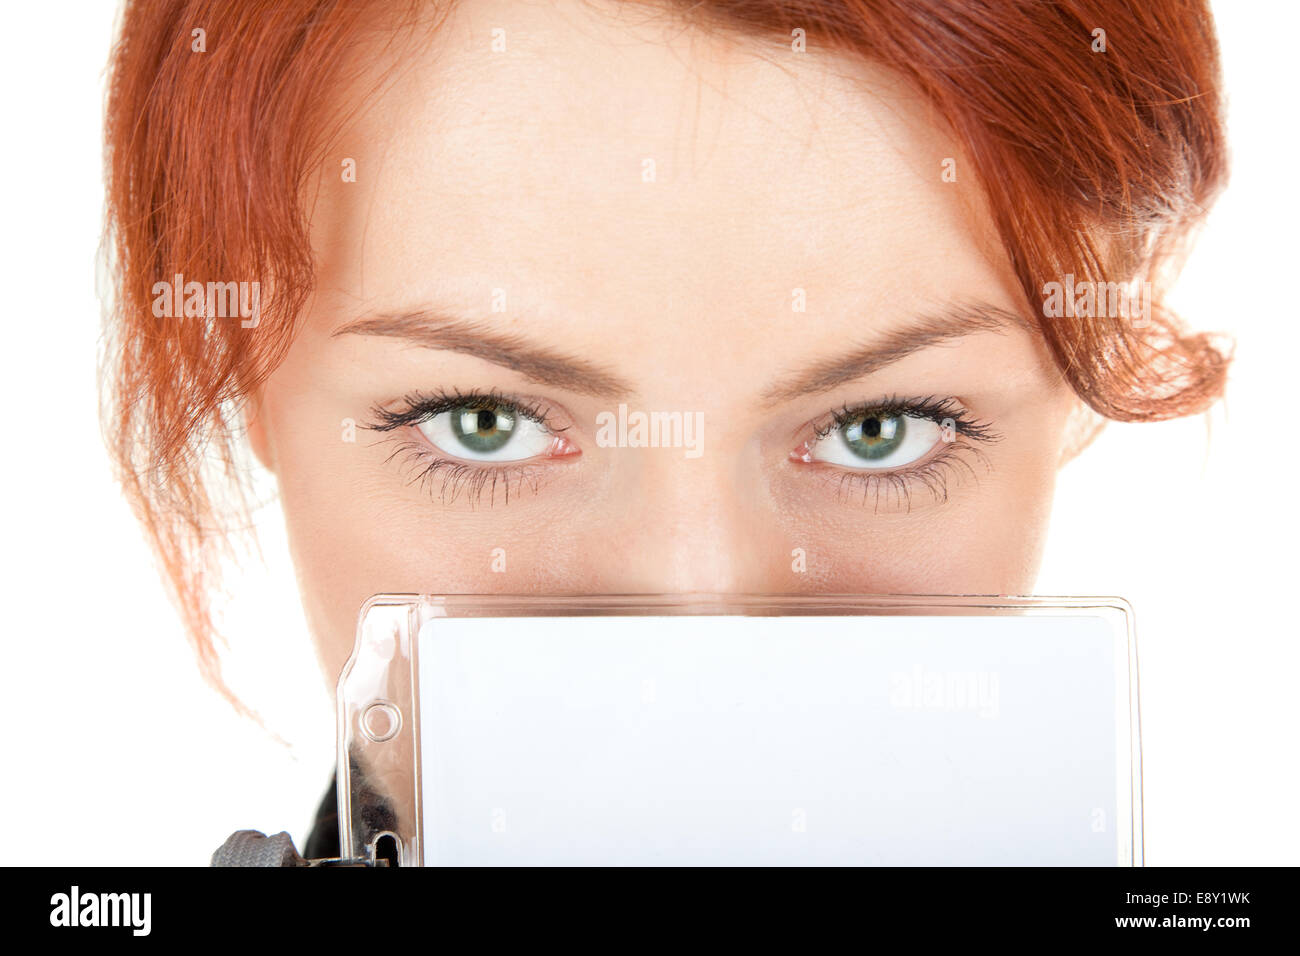 red-haired trendy girl Stock Photo